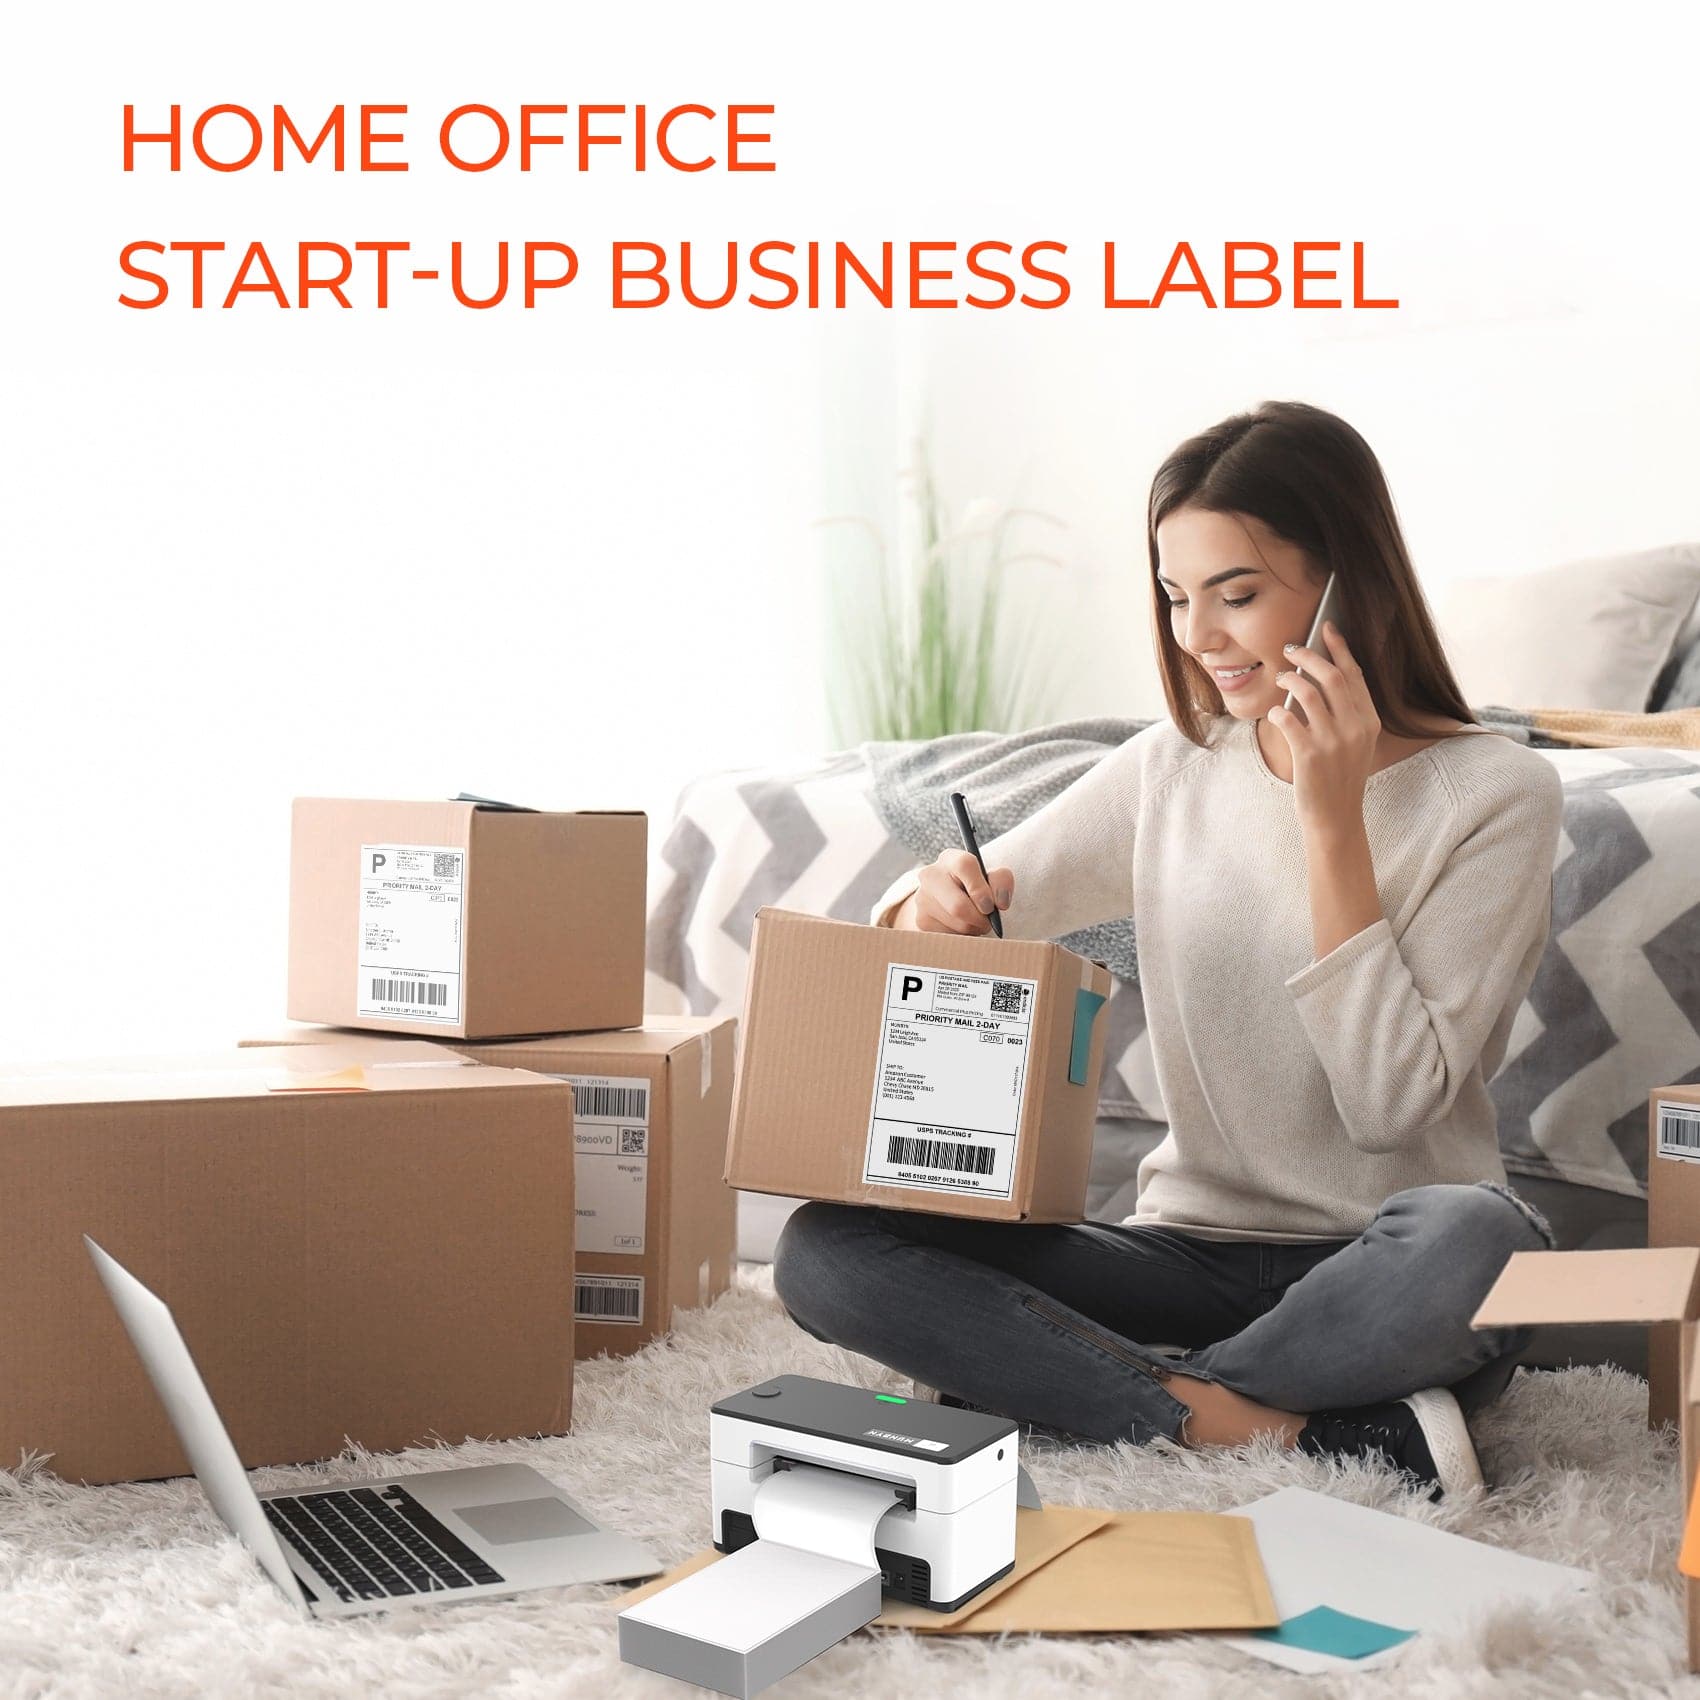 MUNBYN 4x6 thermal labels are perfect for home offices and startup package shipping labels.